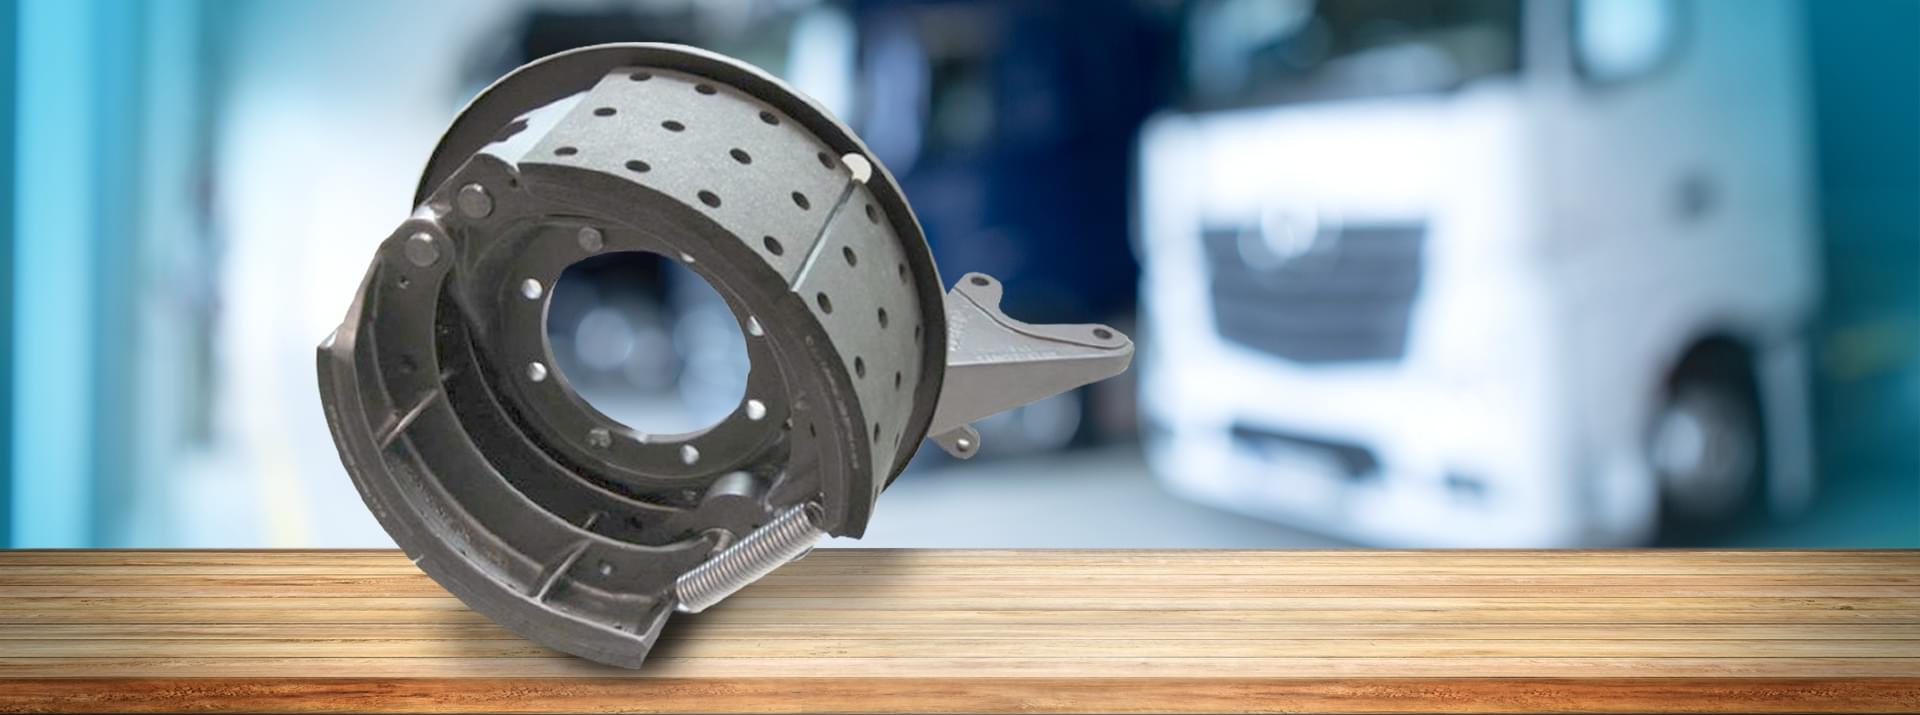 Drum brakes: The key advantages of drum brakes are their robustness and reliability.